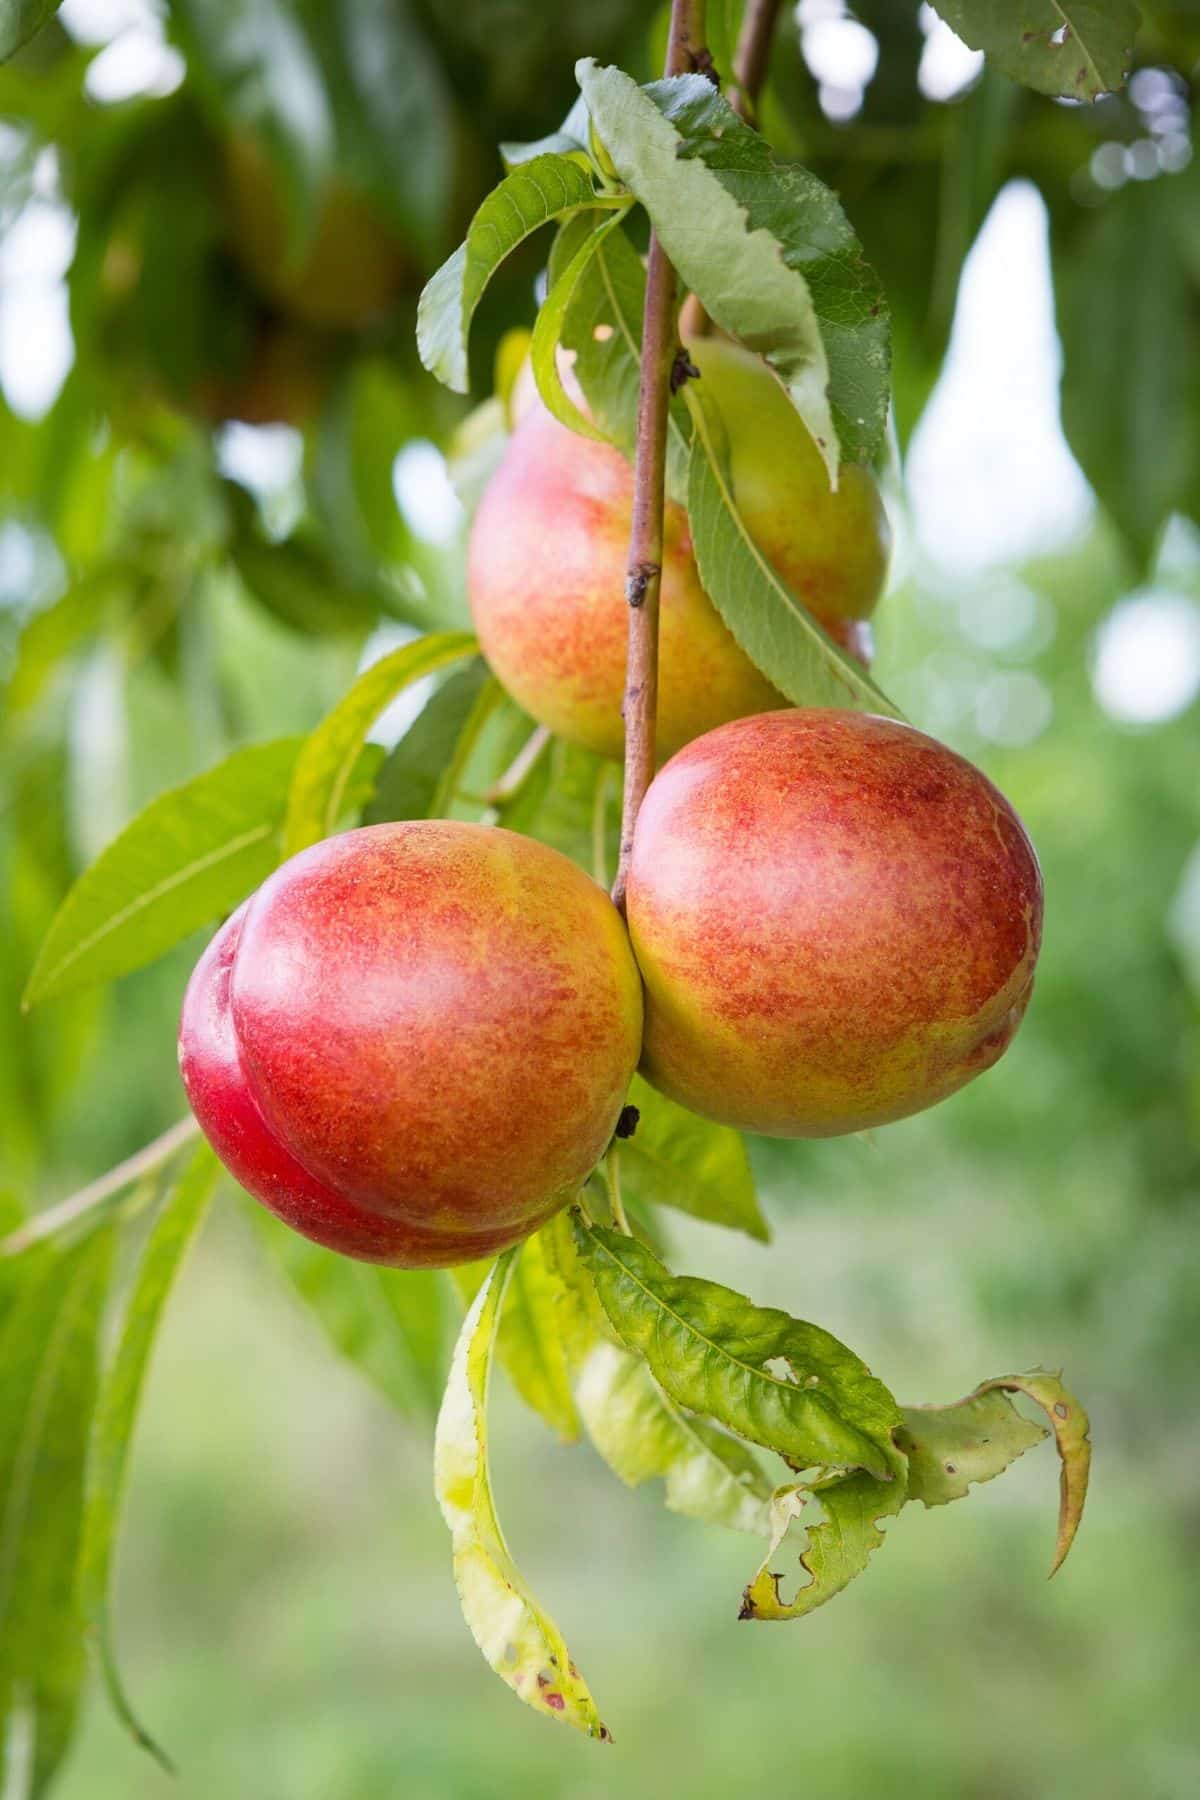 Nectarines on a a leafy green tree outside.